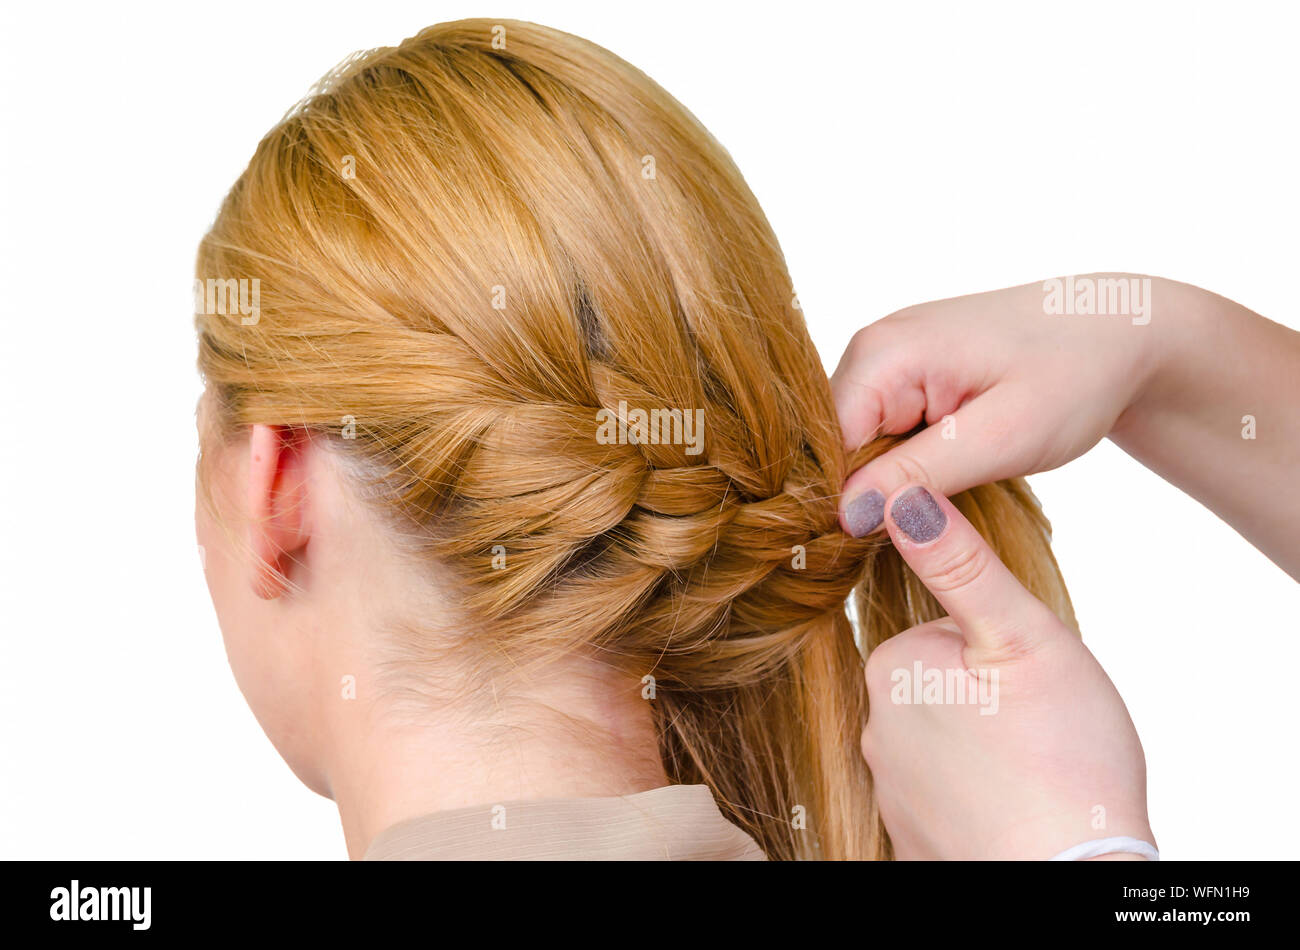 Cropped Hand Weaving Braid On Woman Hair Against White Background Stock  Photo - Alamy